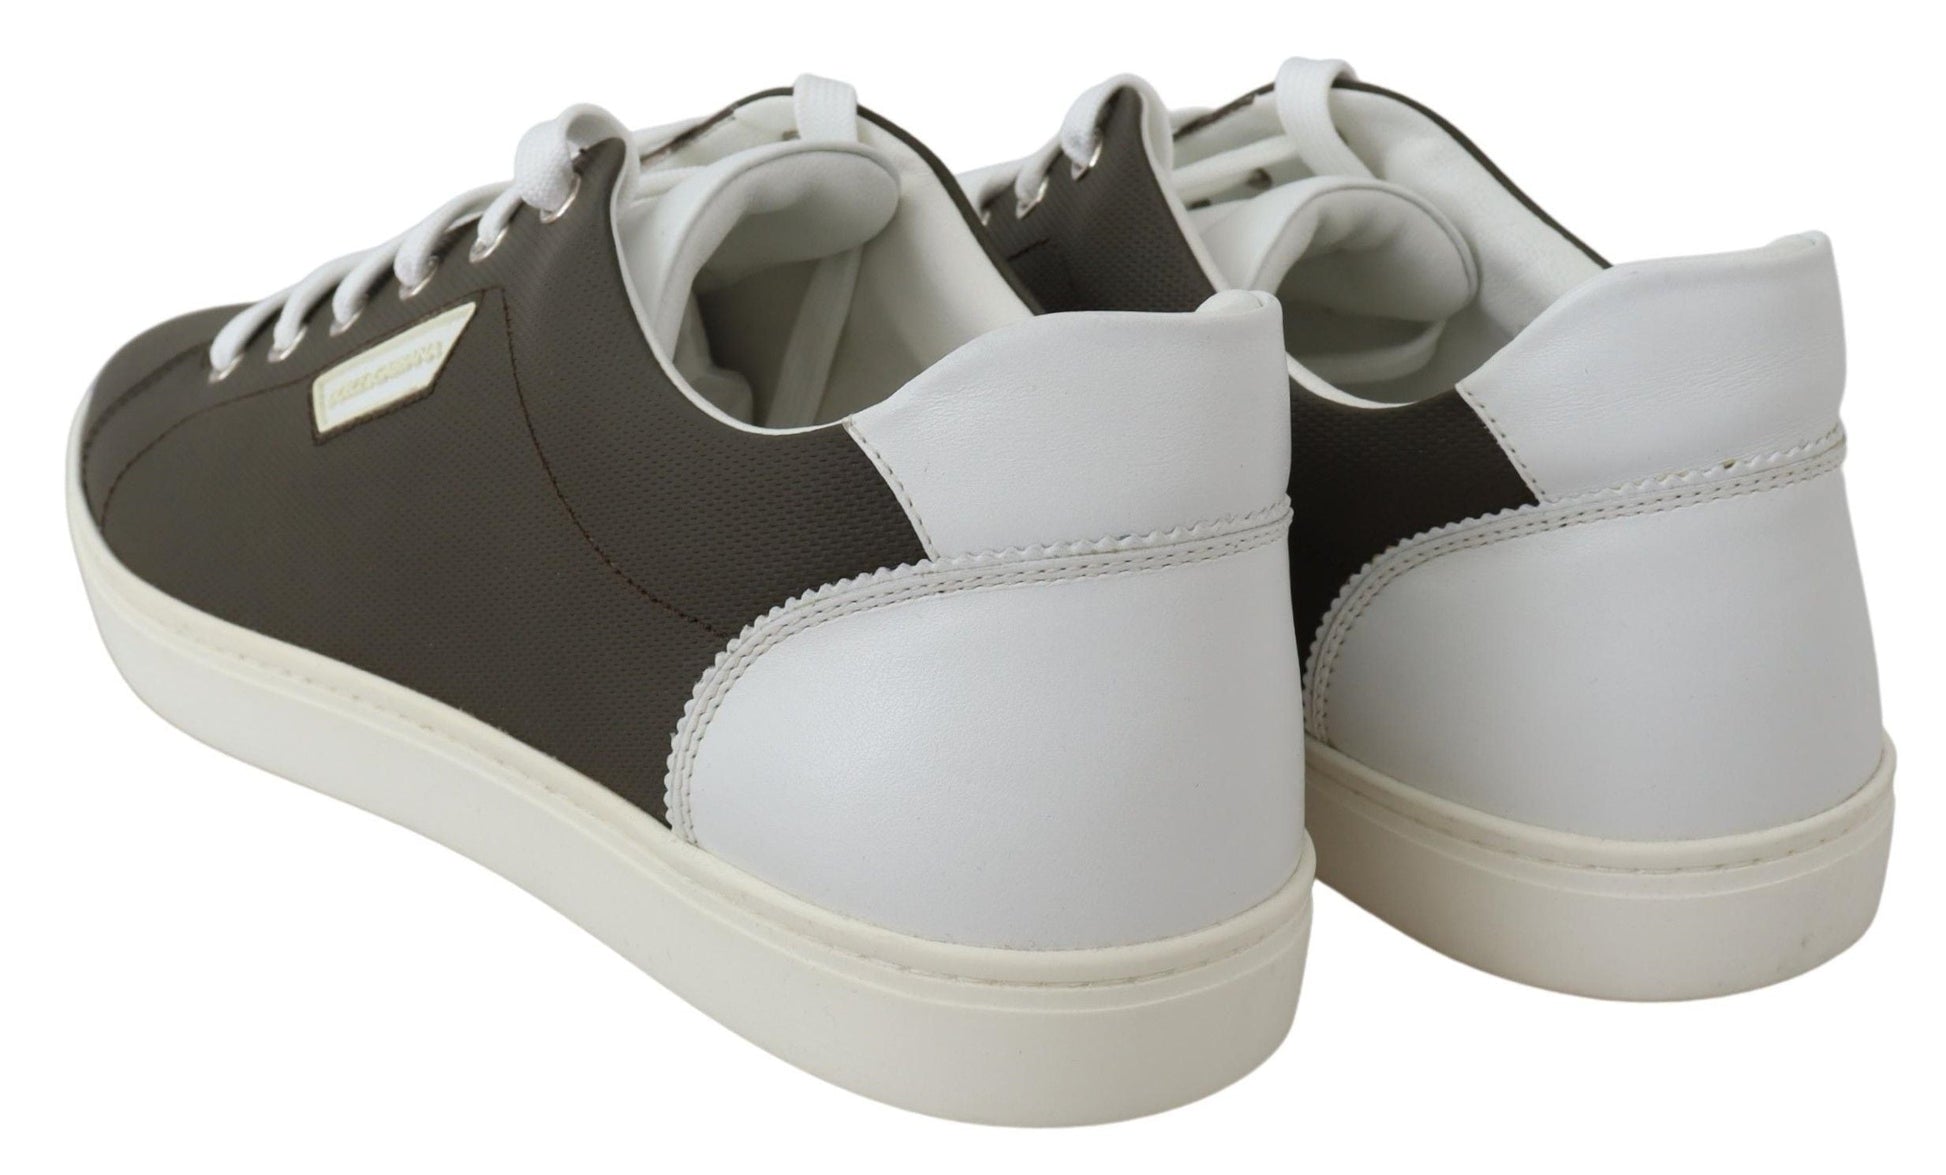 Dolce & Gabbana White Green Leather Low Top Sneakers Shoes | Fashionsarah.com